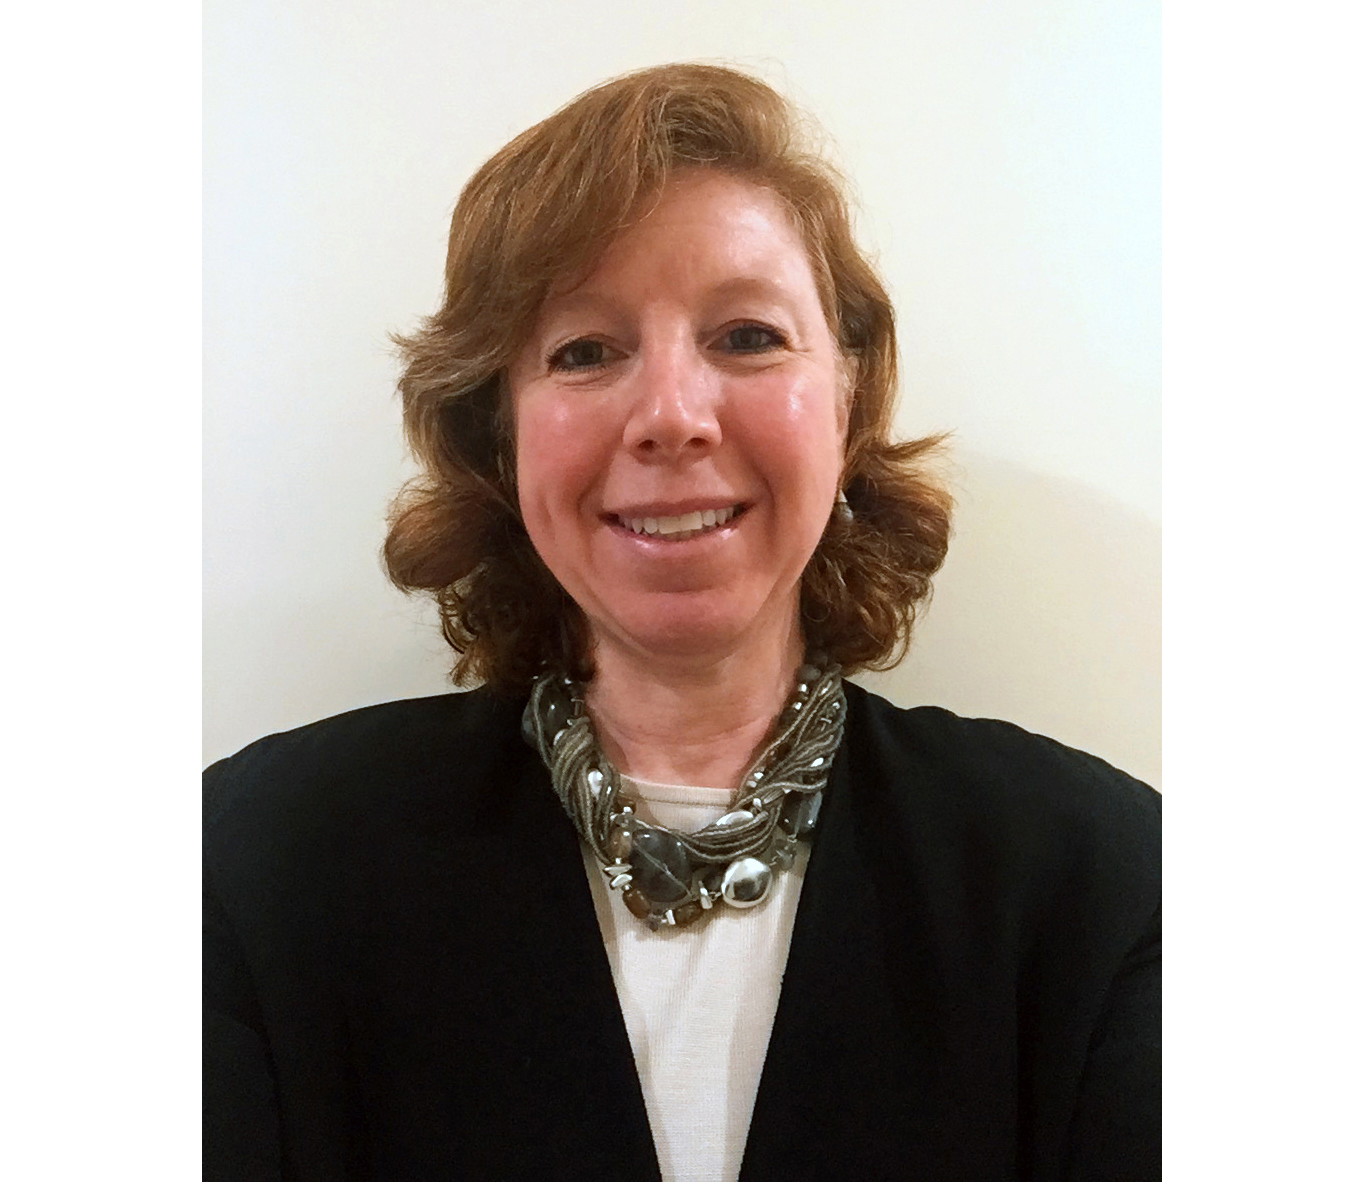 We are pleased to welcome Sub-Acute Medical Director Dr. Deborah Markowitz